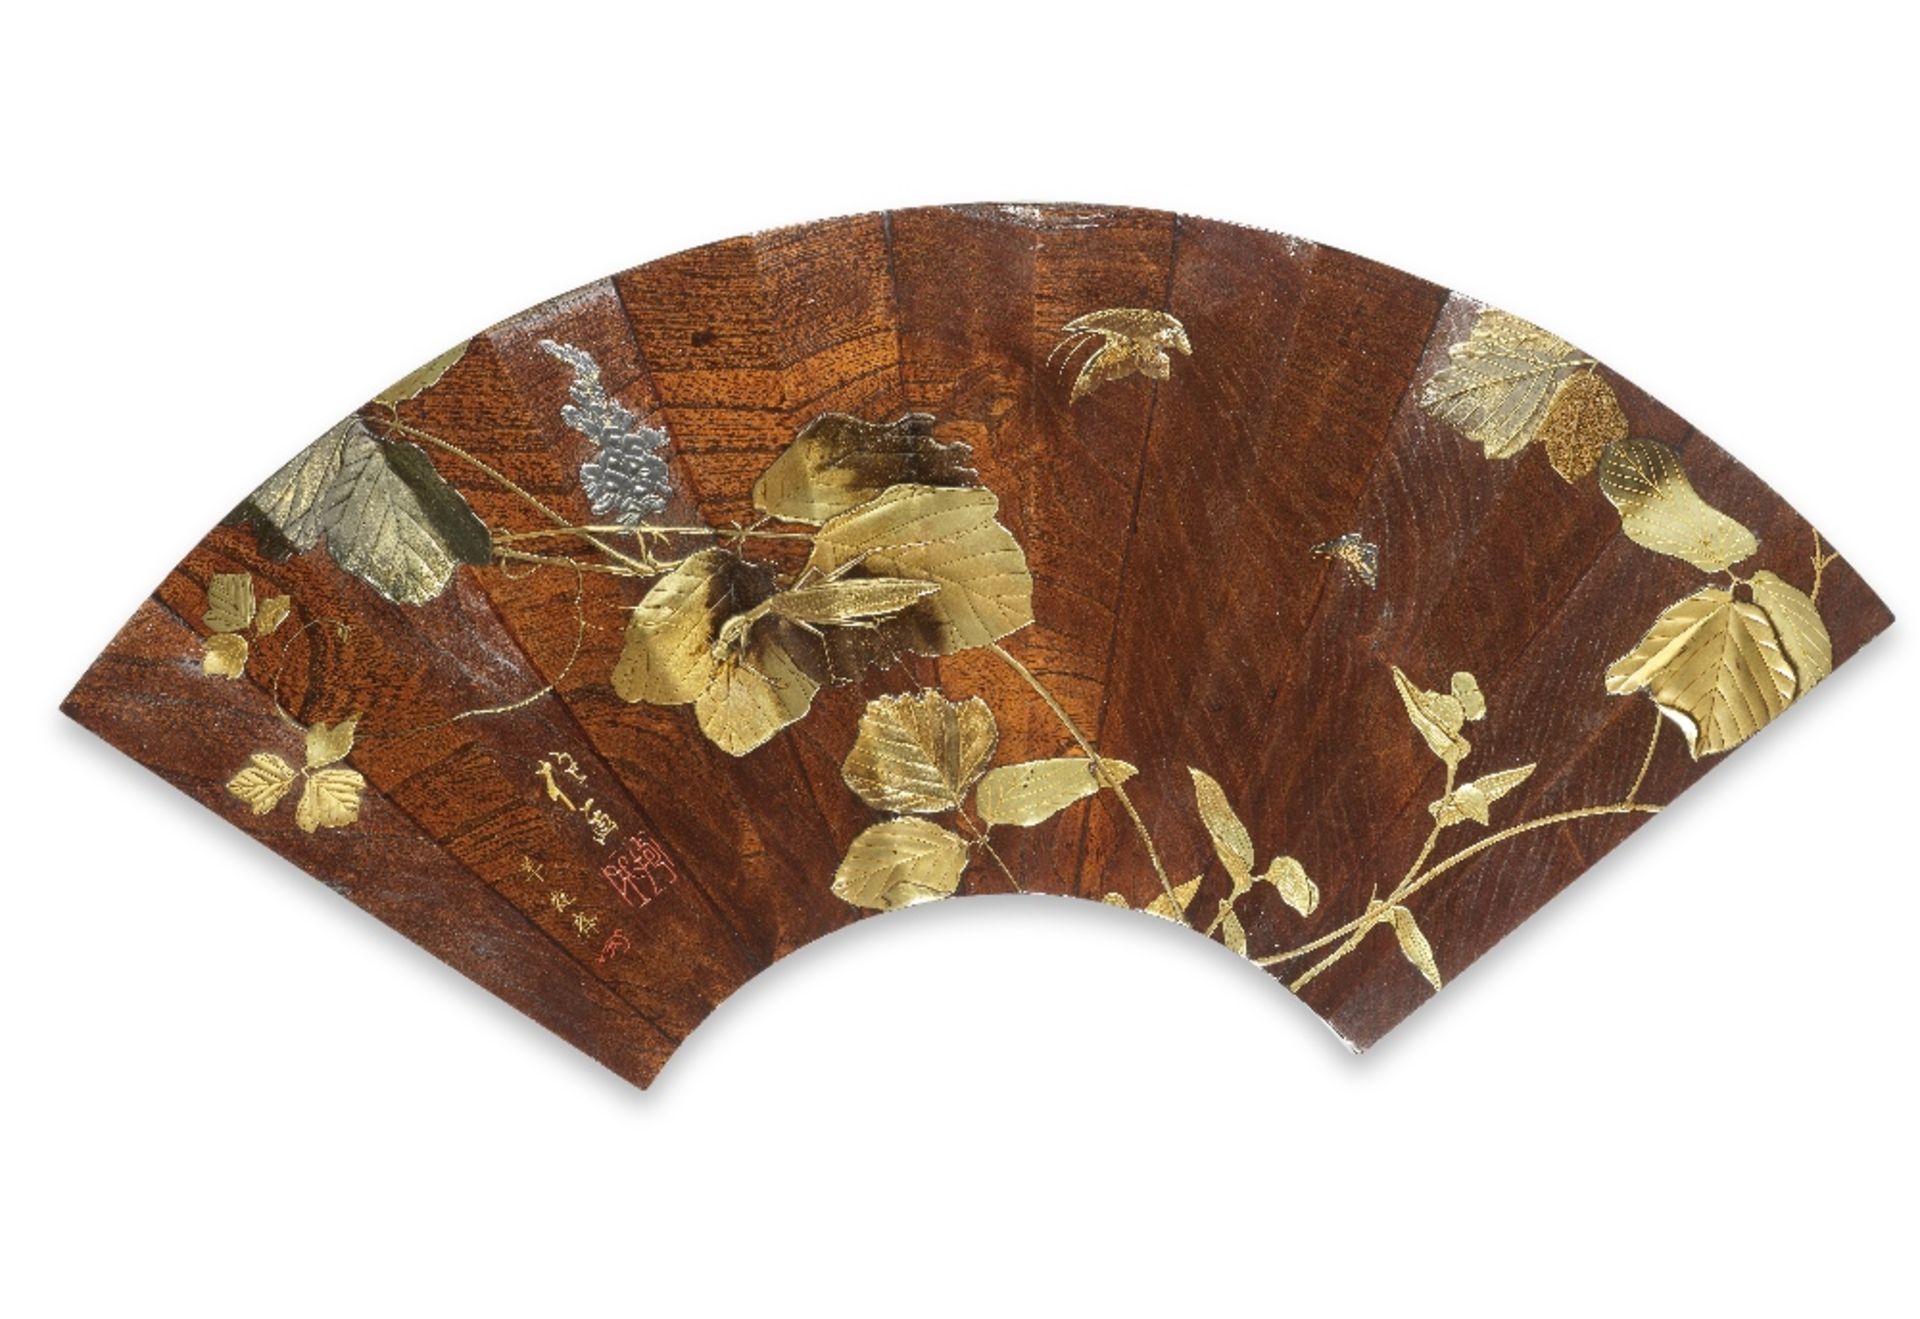 AFTER HARA YOYUSAI (1772-1845/6) A Gold-Lacquered Wood Panel in the Form of an Ogi (Folding Fan)...